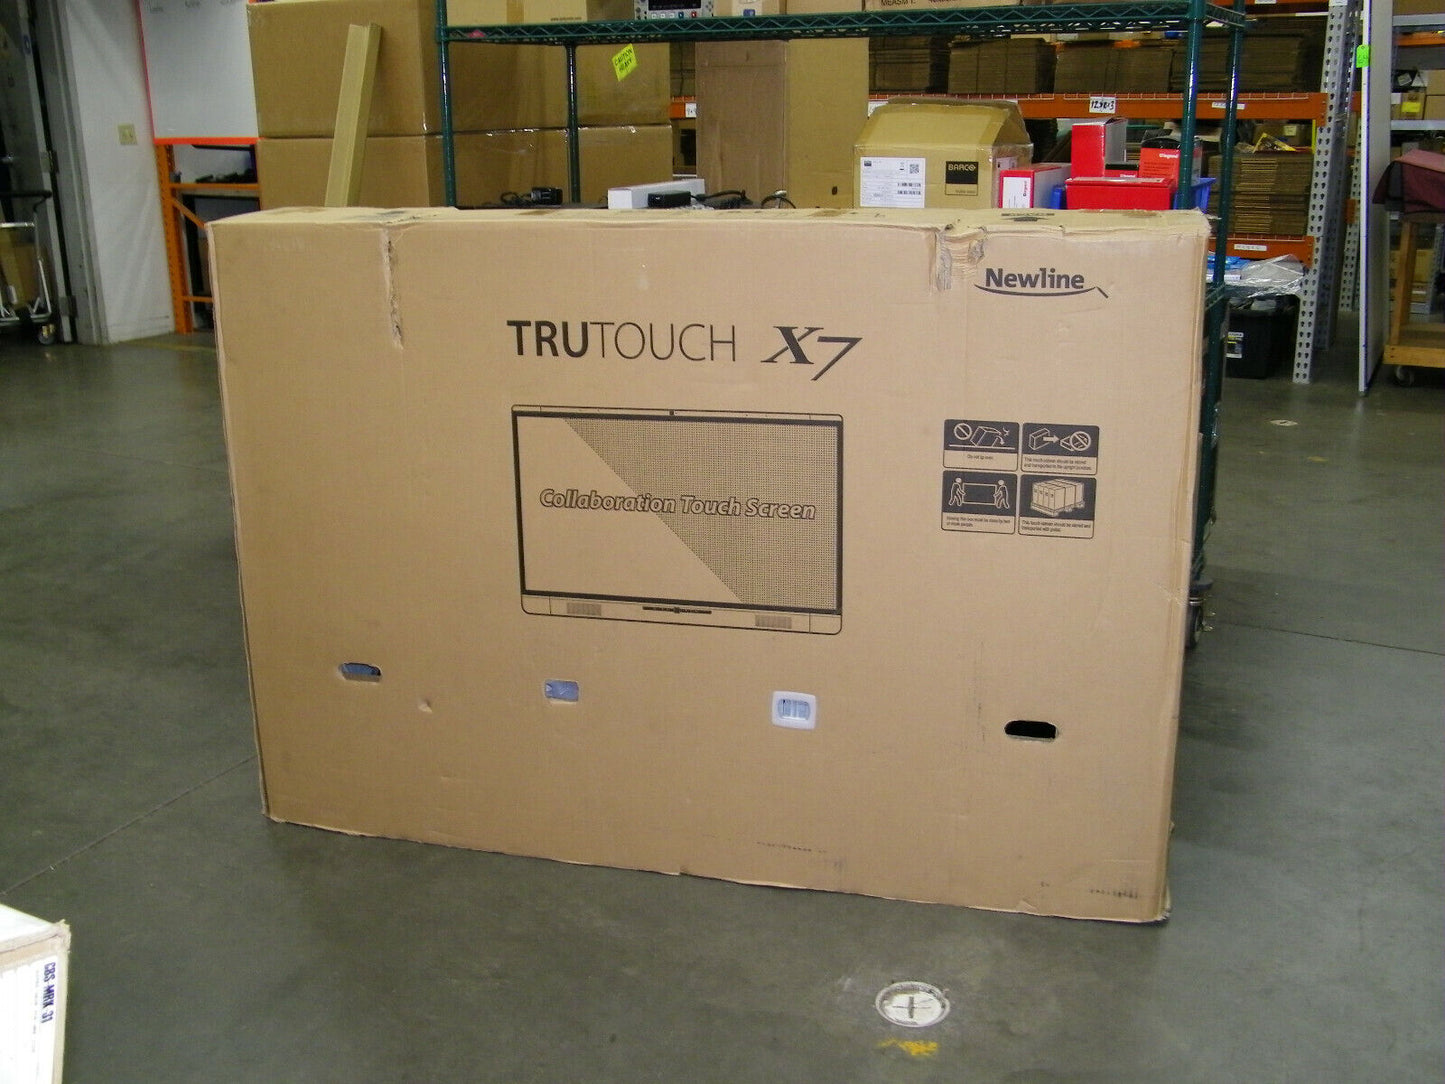 Newline Trutouch X7 / 70" Collaboration Series Interactive Touchscreen Display